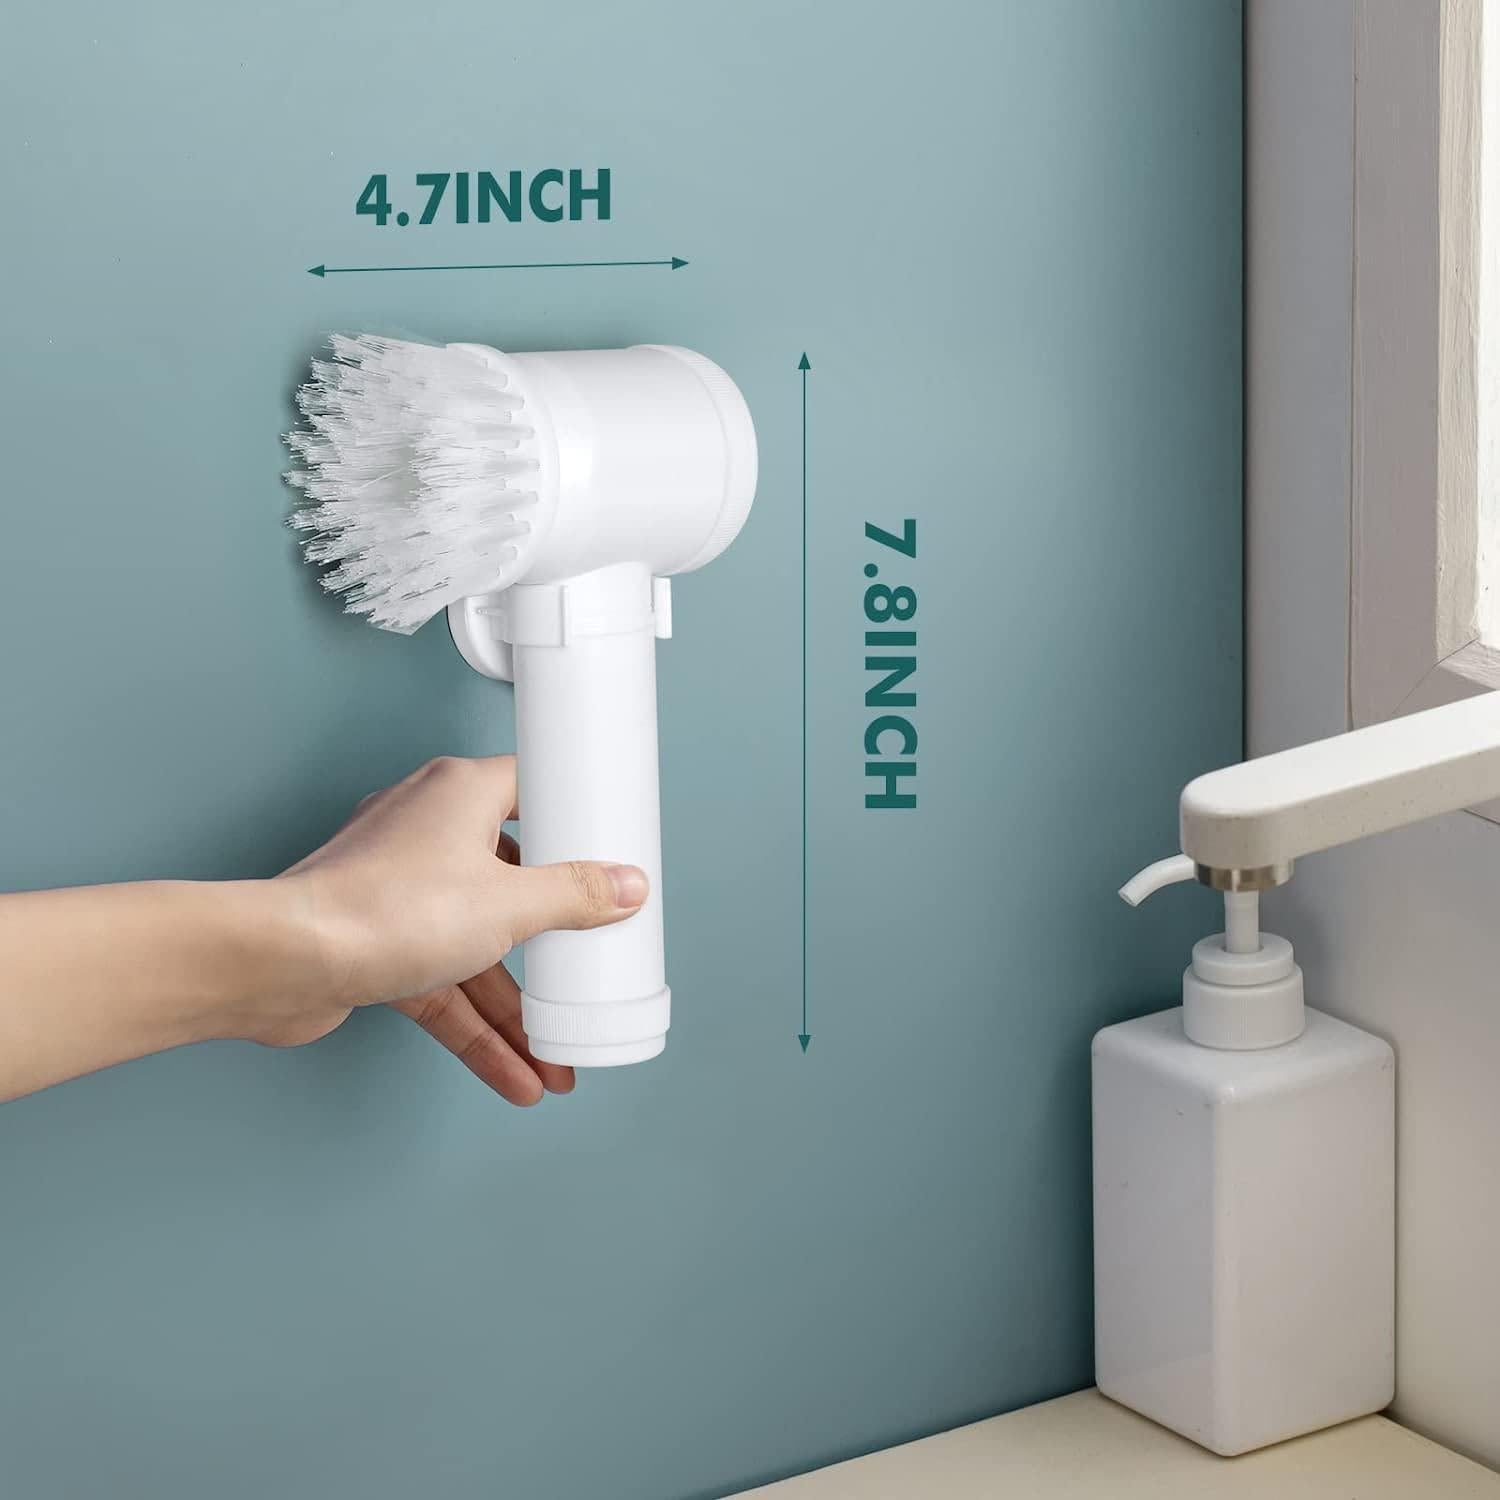 The white handheld cleaning brush shown on the wall with measurements mentiond as - 4.7 Inches width and 7.8 inches height